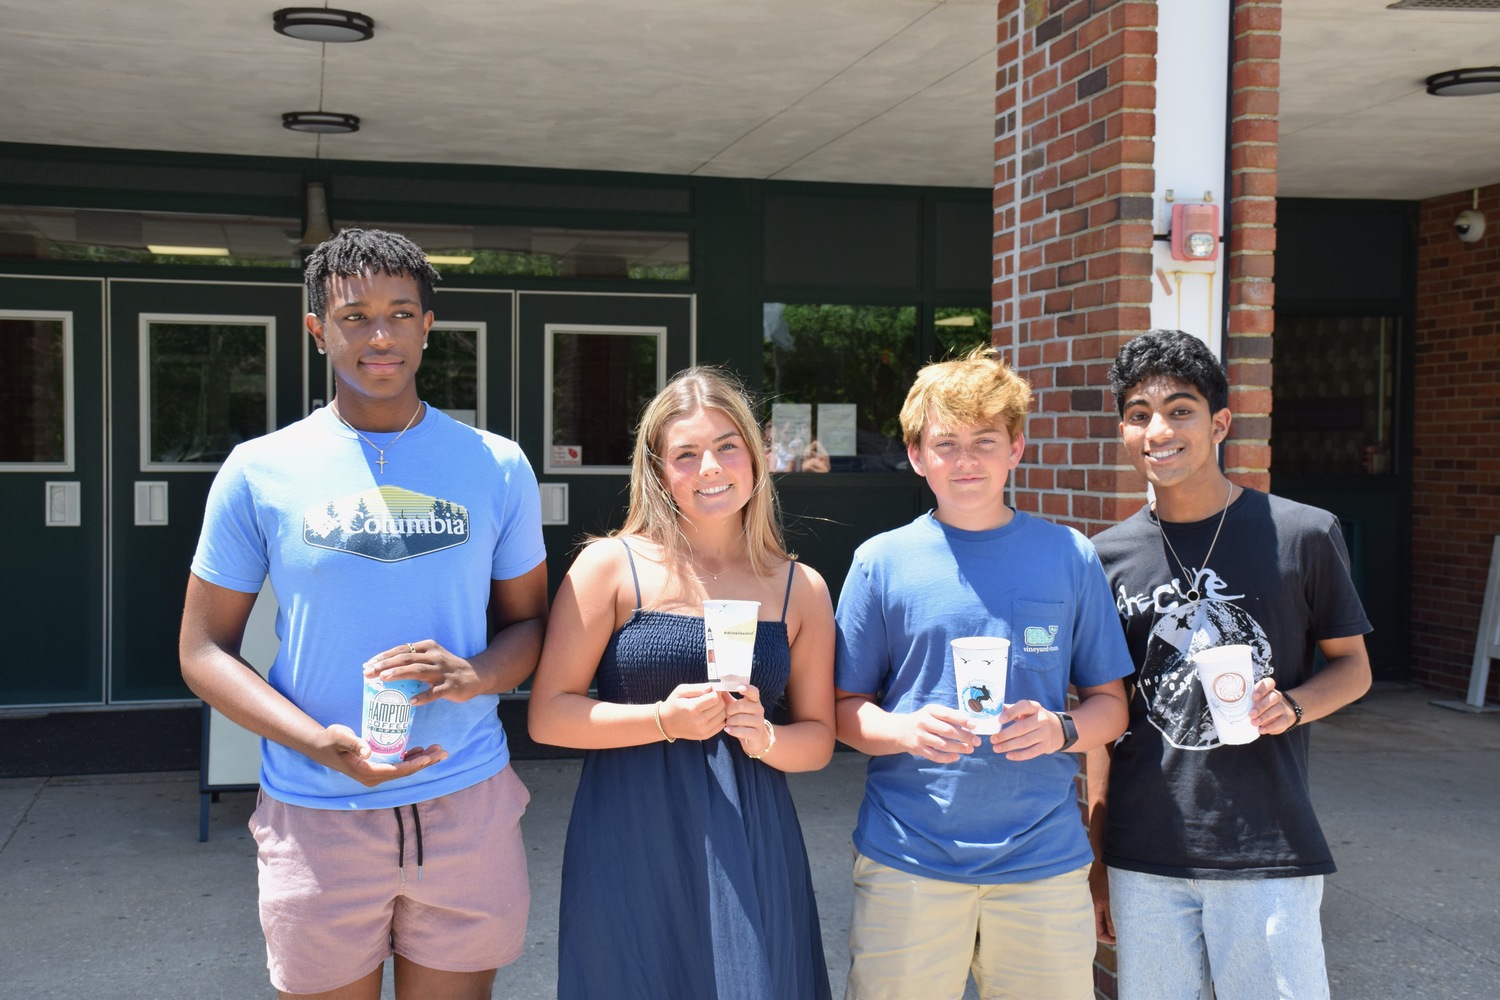 The designs and slogans of five Westhampton Beach High School students, including those of, from left, Donye' Hope, Sienna Macdonald, Jayden Valenti and Luke Albert, are now featured on coffee cups at Hampton Coffee in Westhampton Beach. COURTESY WESTHAMPTON BEACH SCHOO L DISTRICT